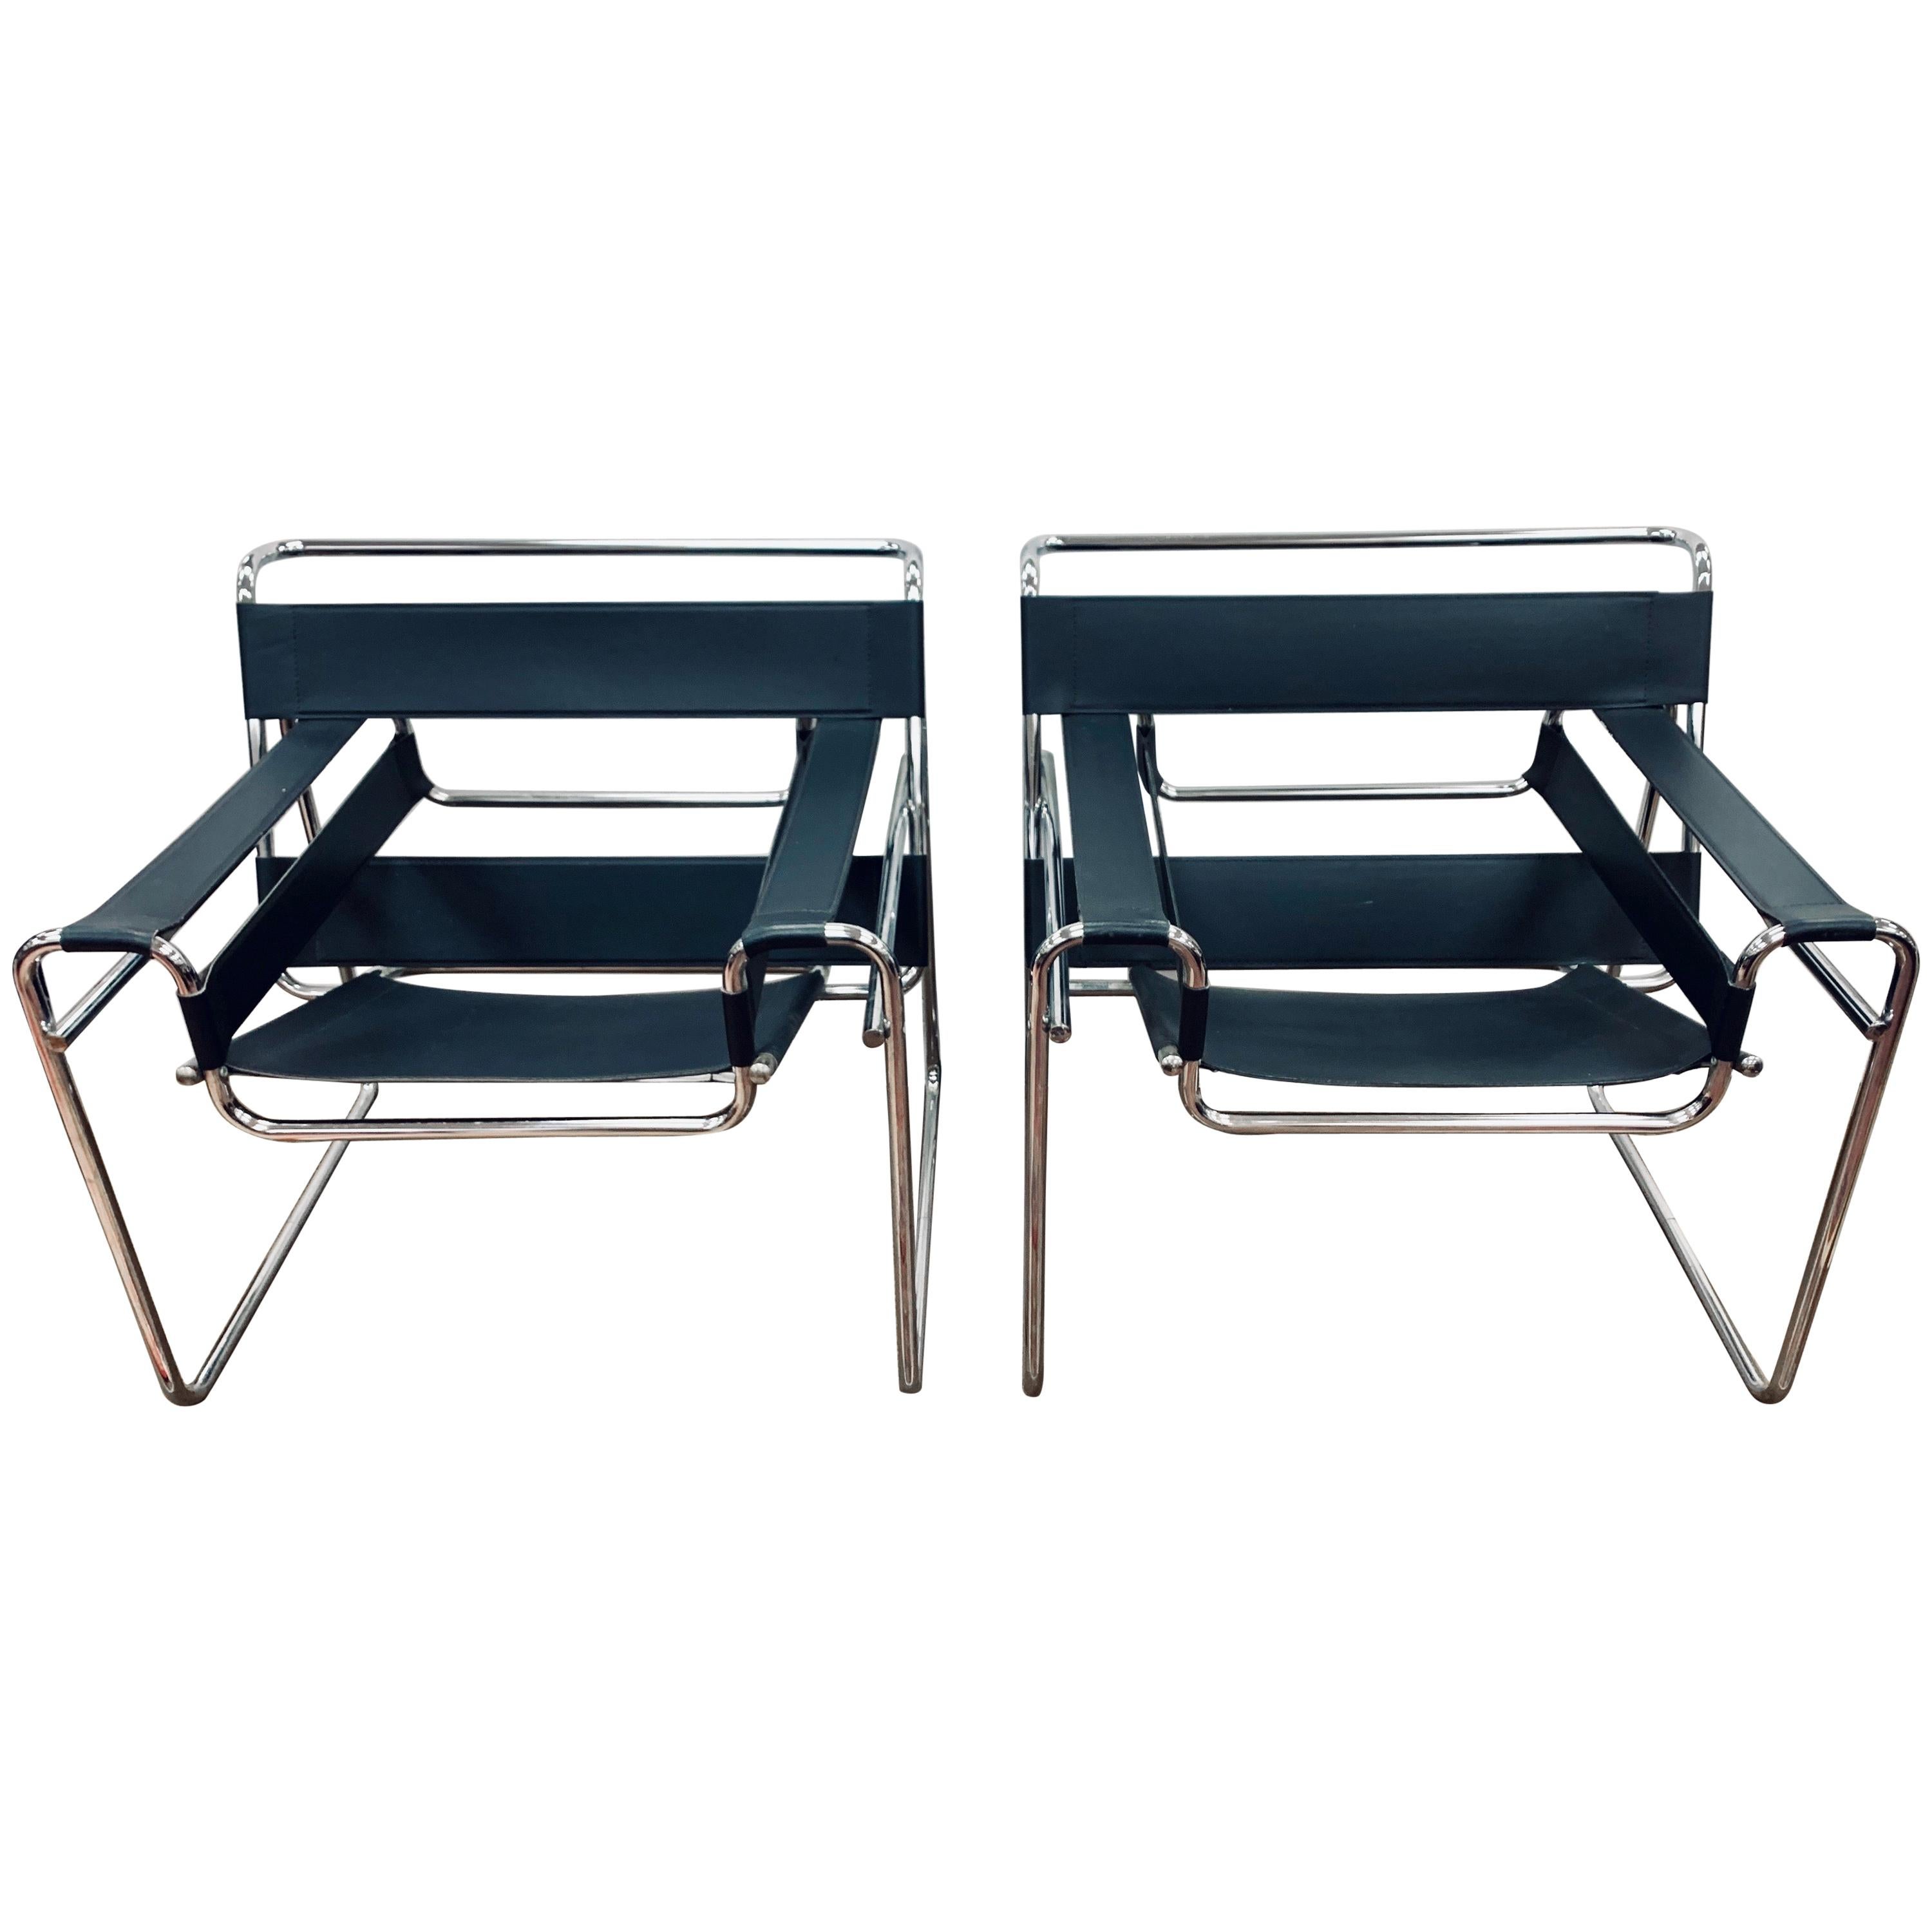 Midcentury Marcel Breuer Style Black and Chrome Wassily Chairs, Pair